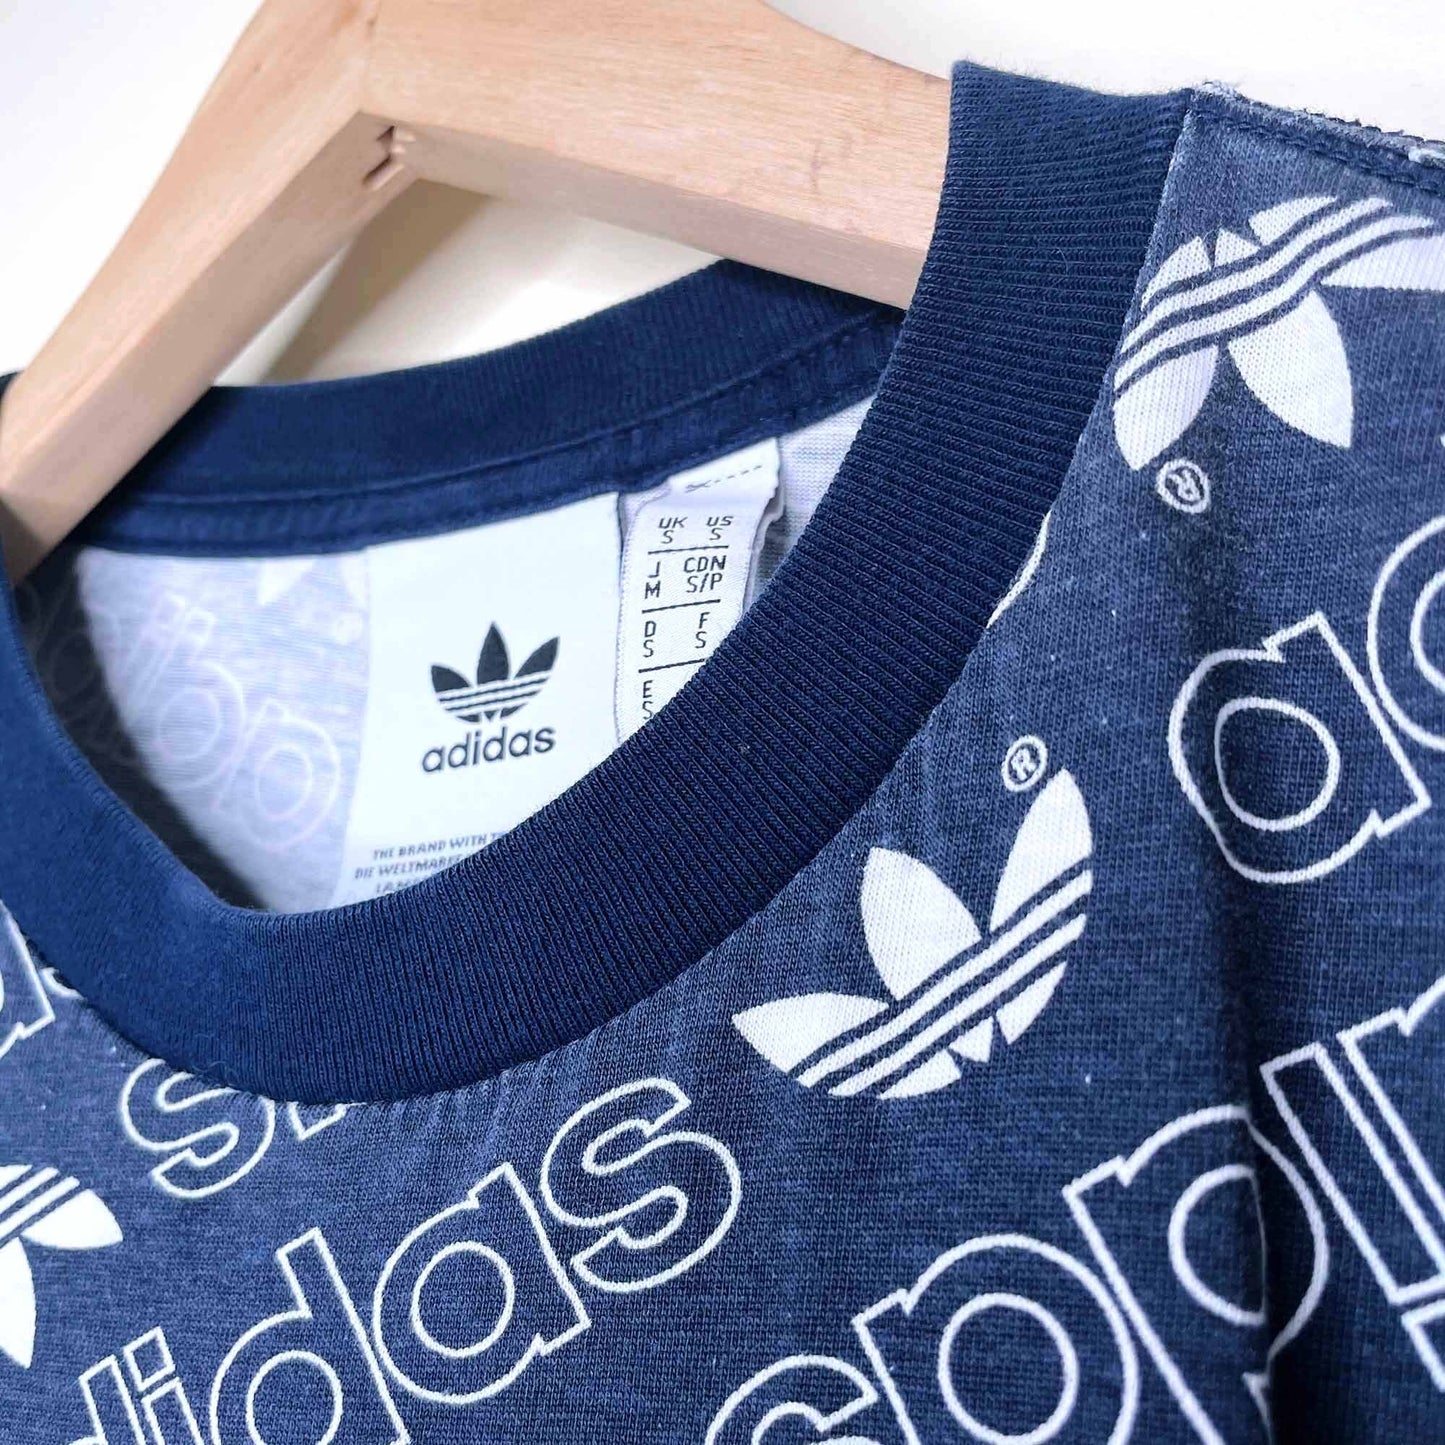 adidas trefoil logo step and repeat ringer tee - size small